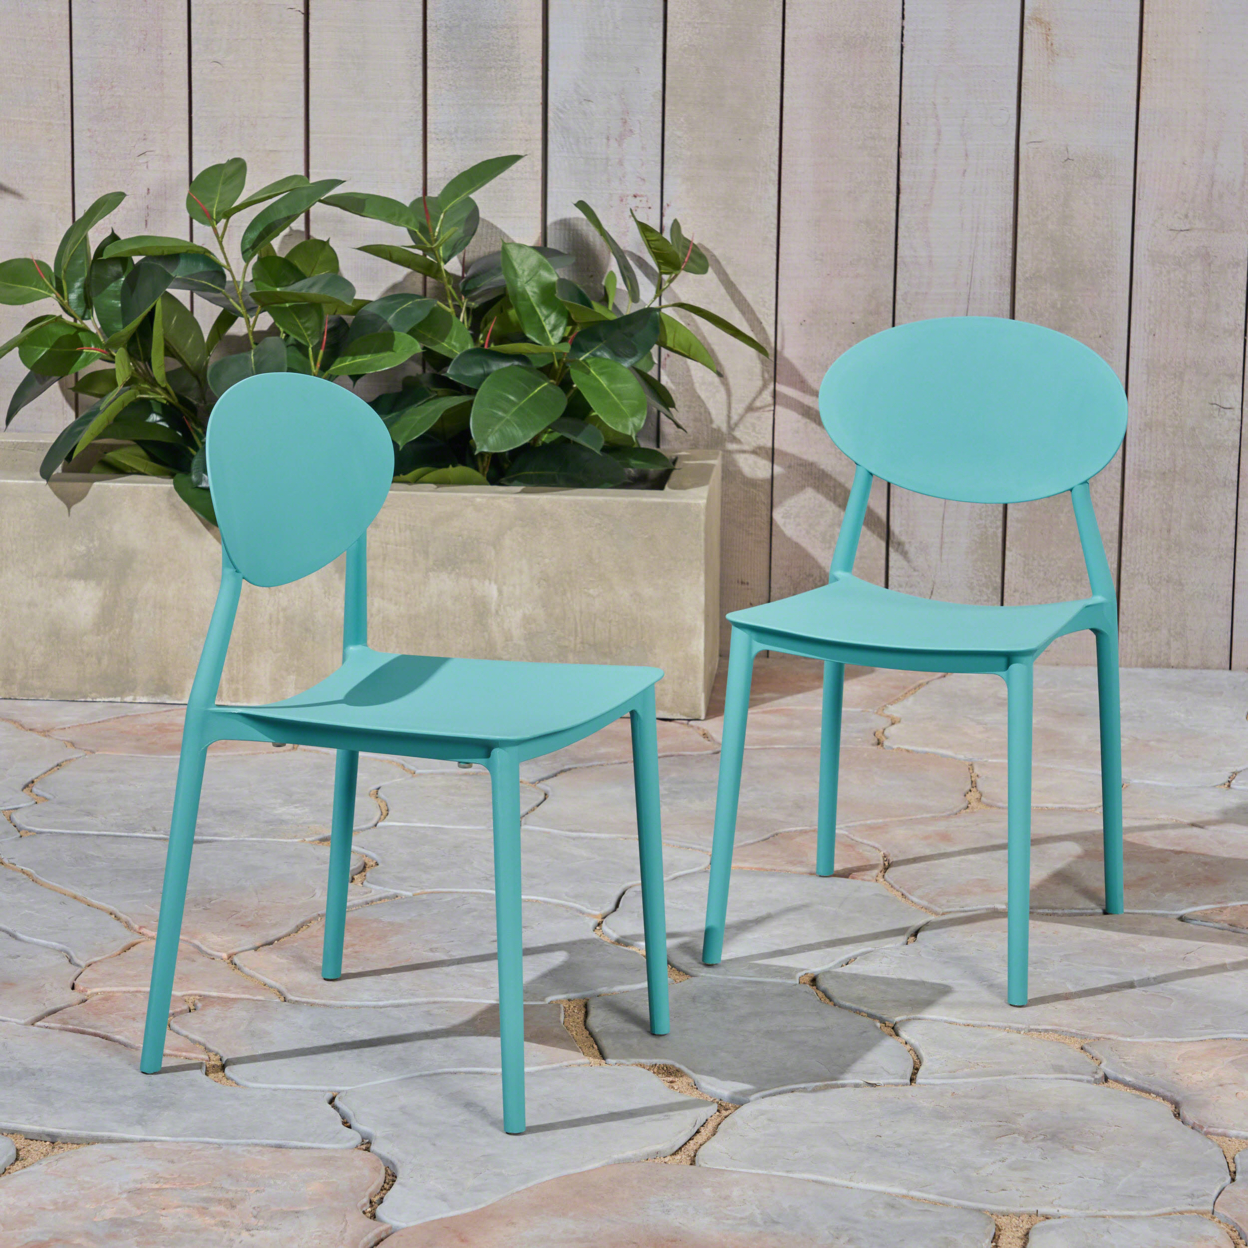 Brynn Outdoor Plastic Chairs (Set Of 2) - Teal, Set Of 2